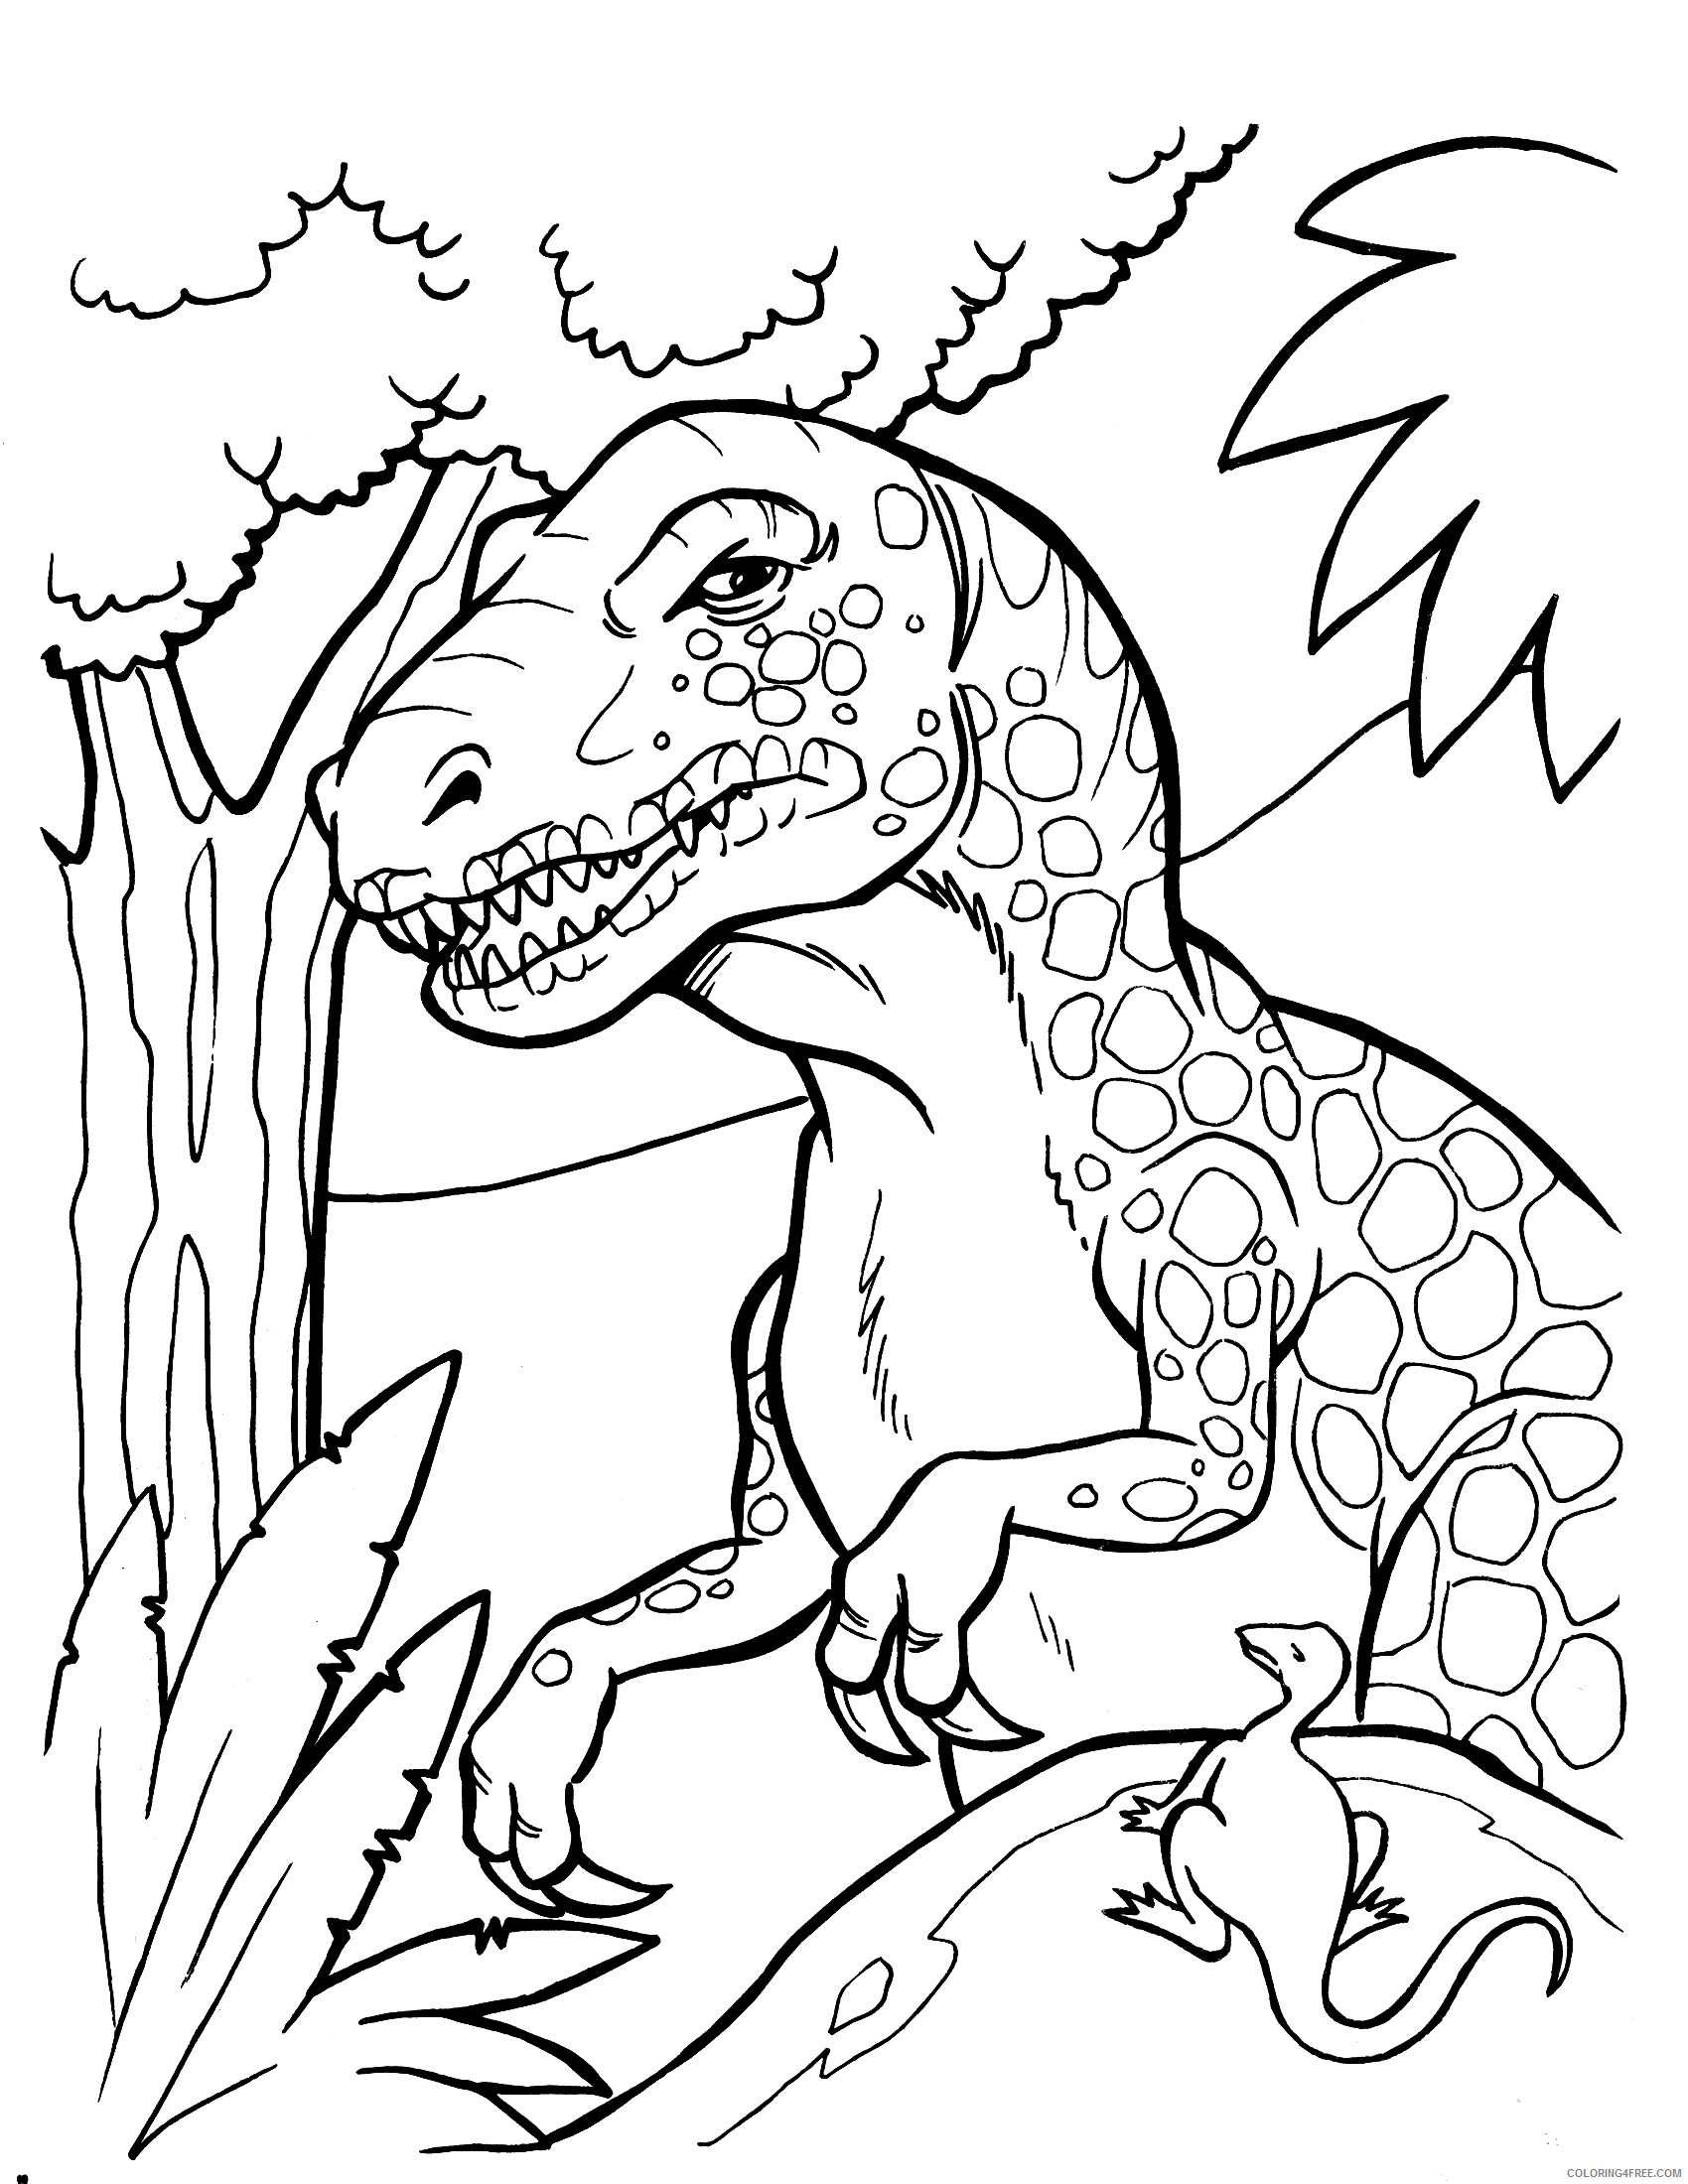 Dinosaurs Coloring Pages for boys Free Dinosaur Printable 2020 0310 Coloring4free